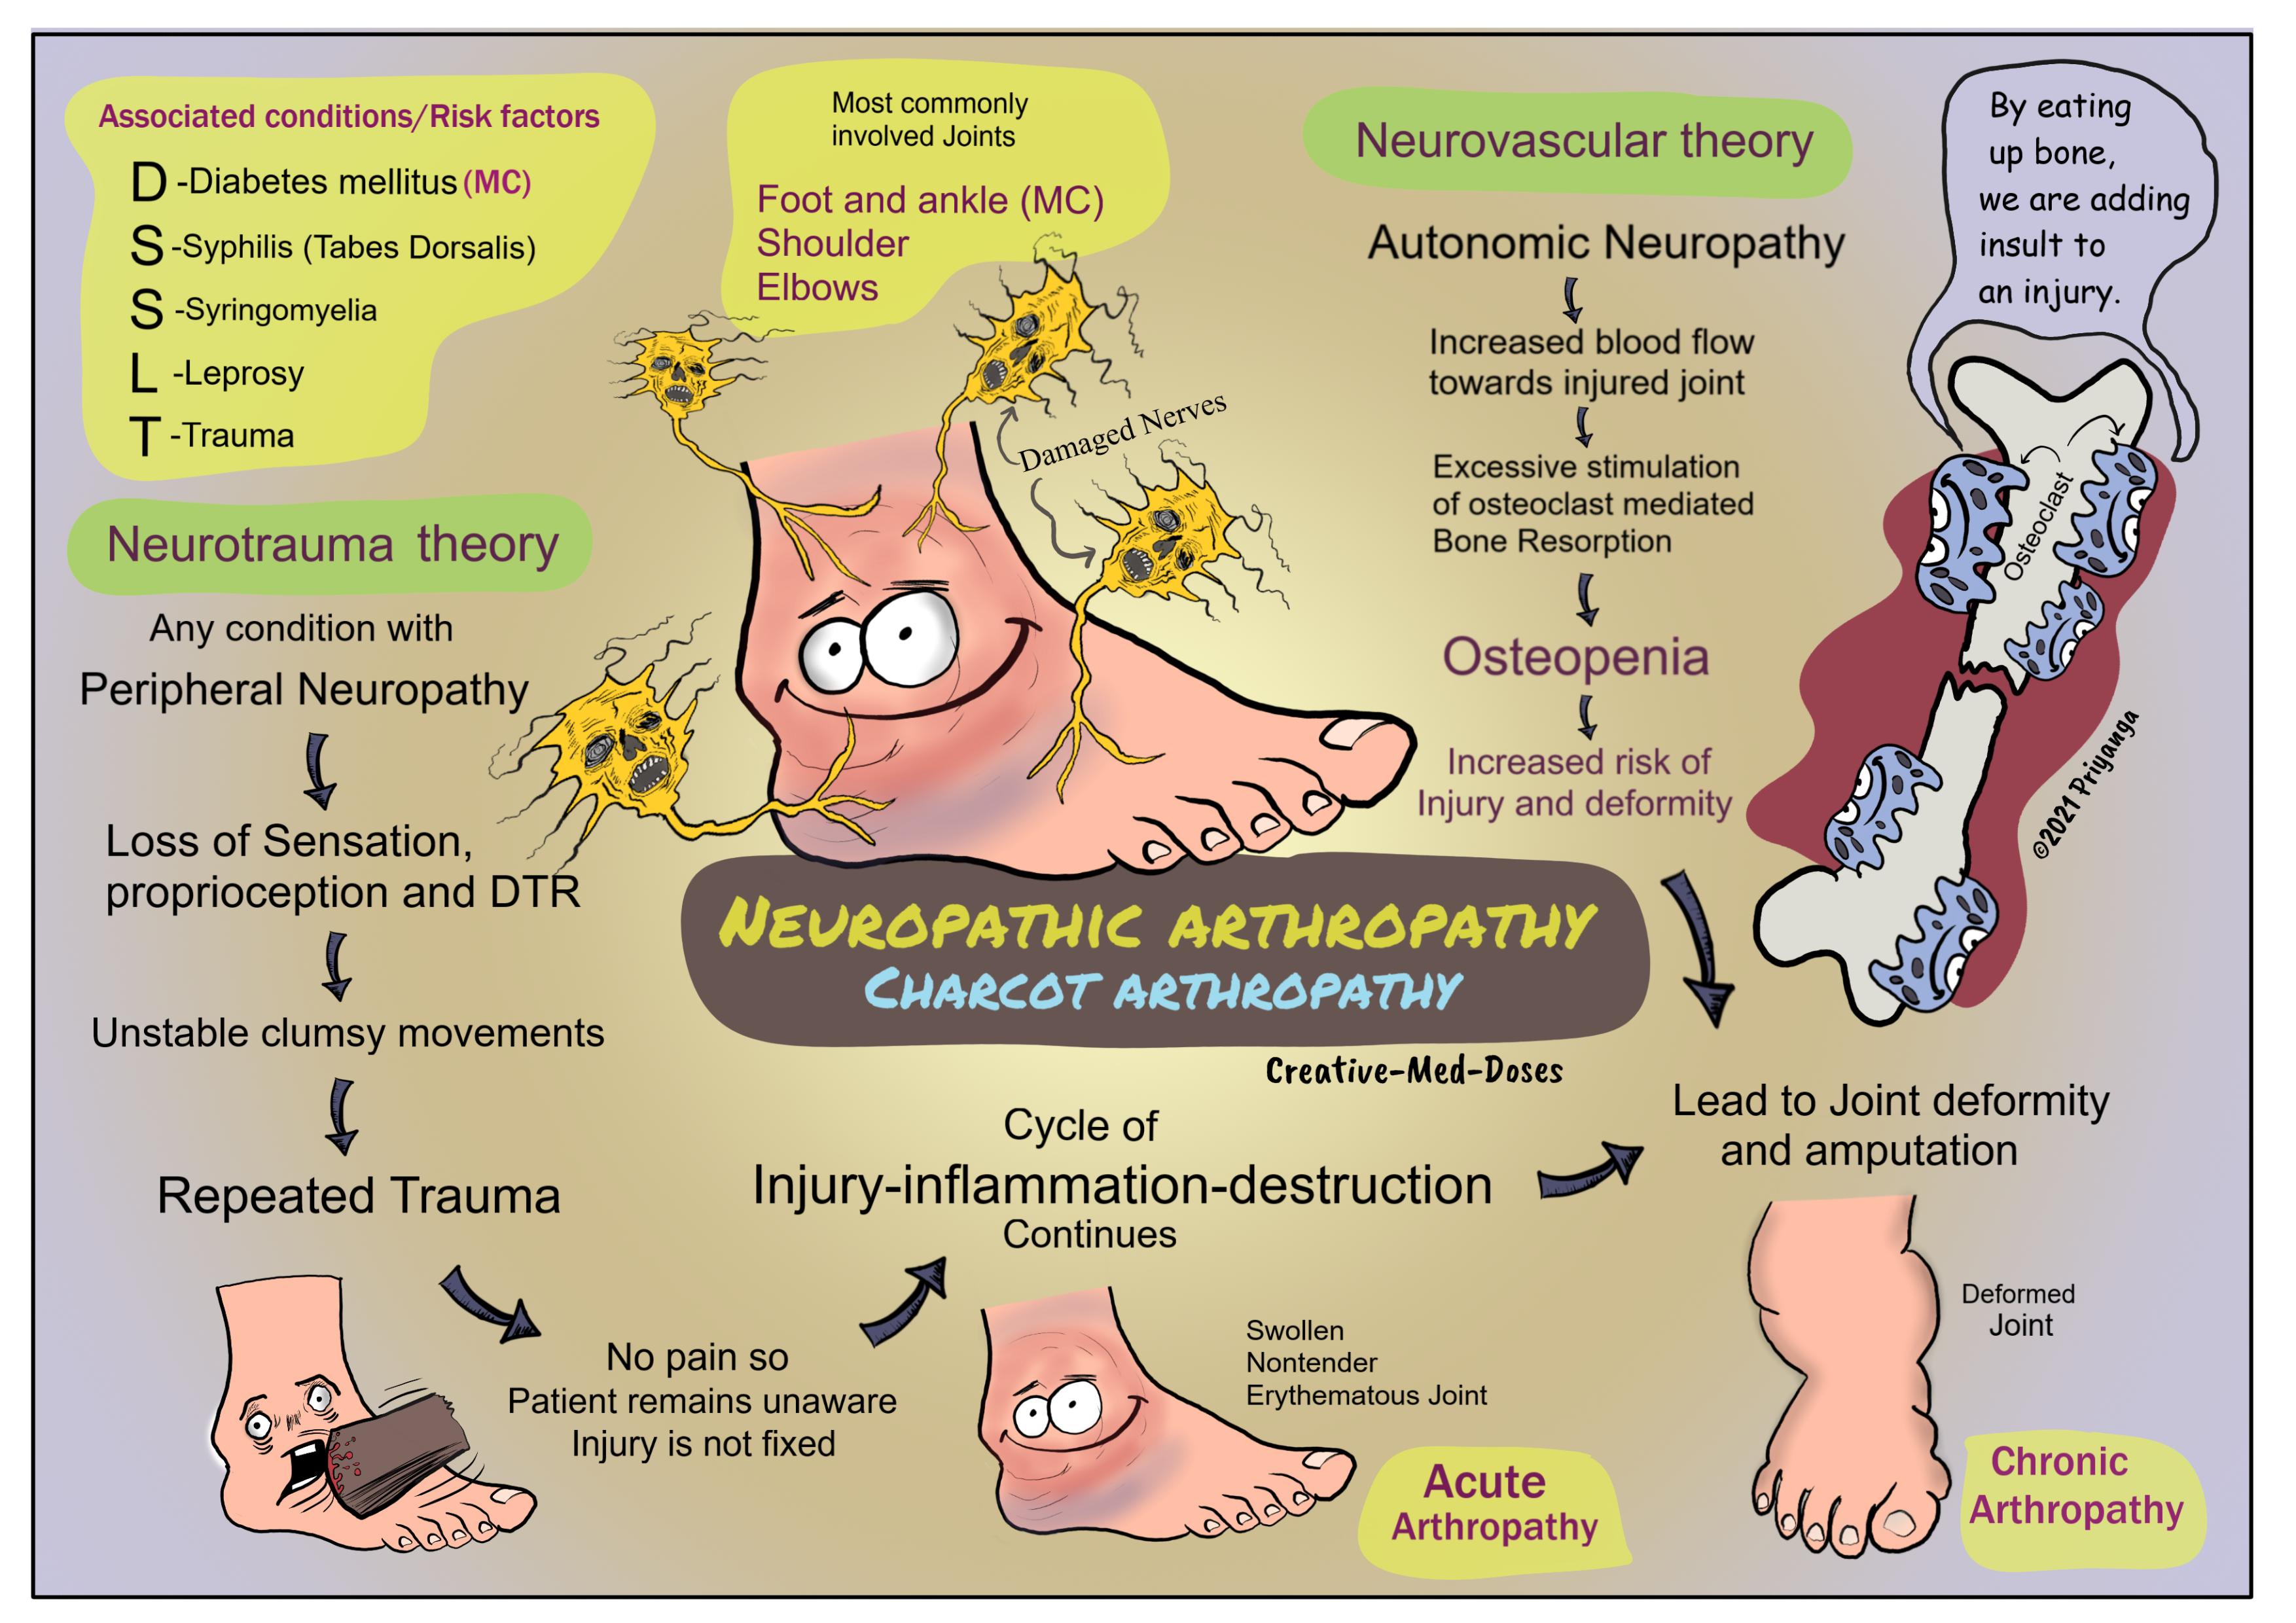 Neuropathic arthropathy (Charcot arthropathy): Clinical features and pathophysiology 